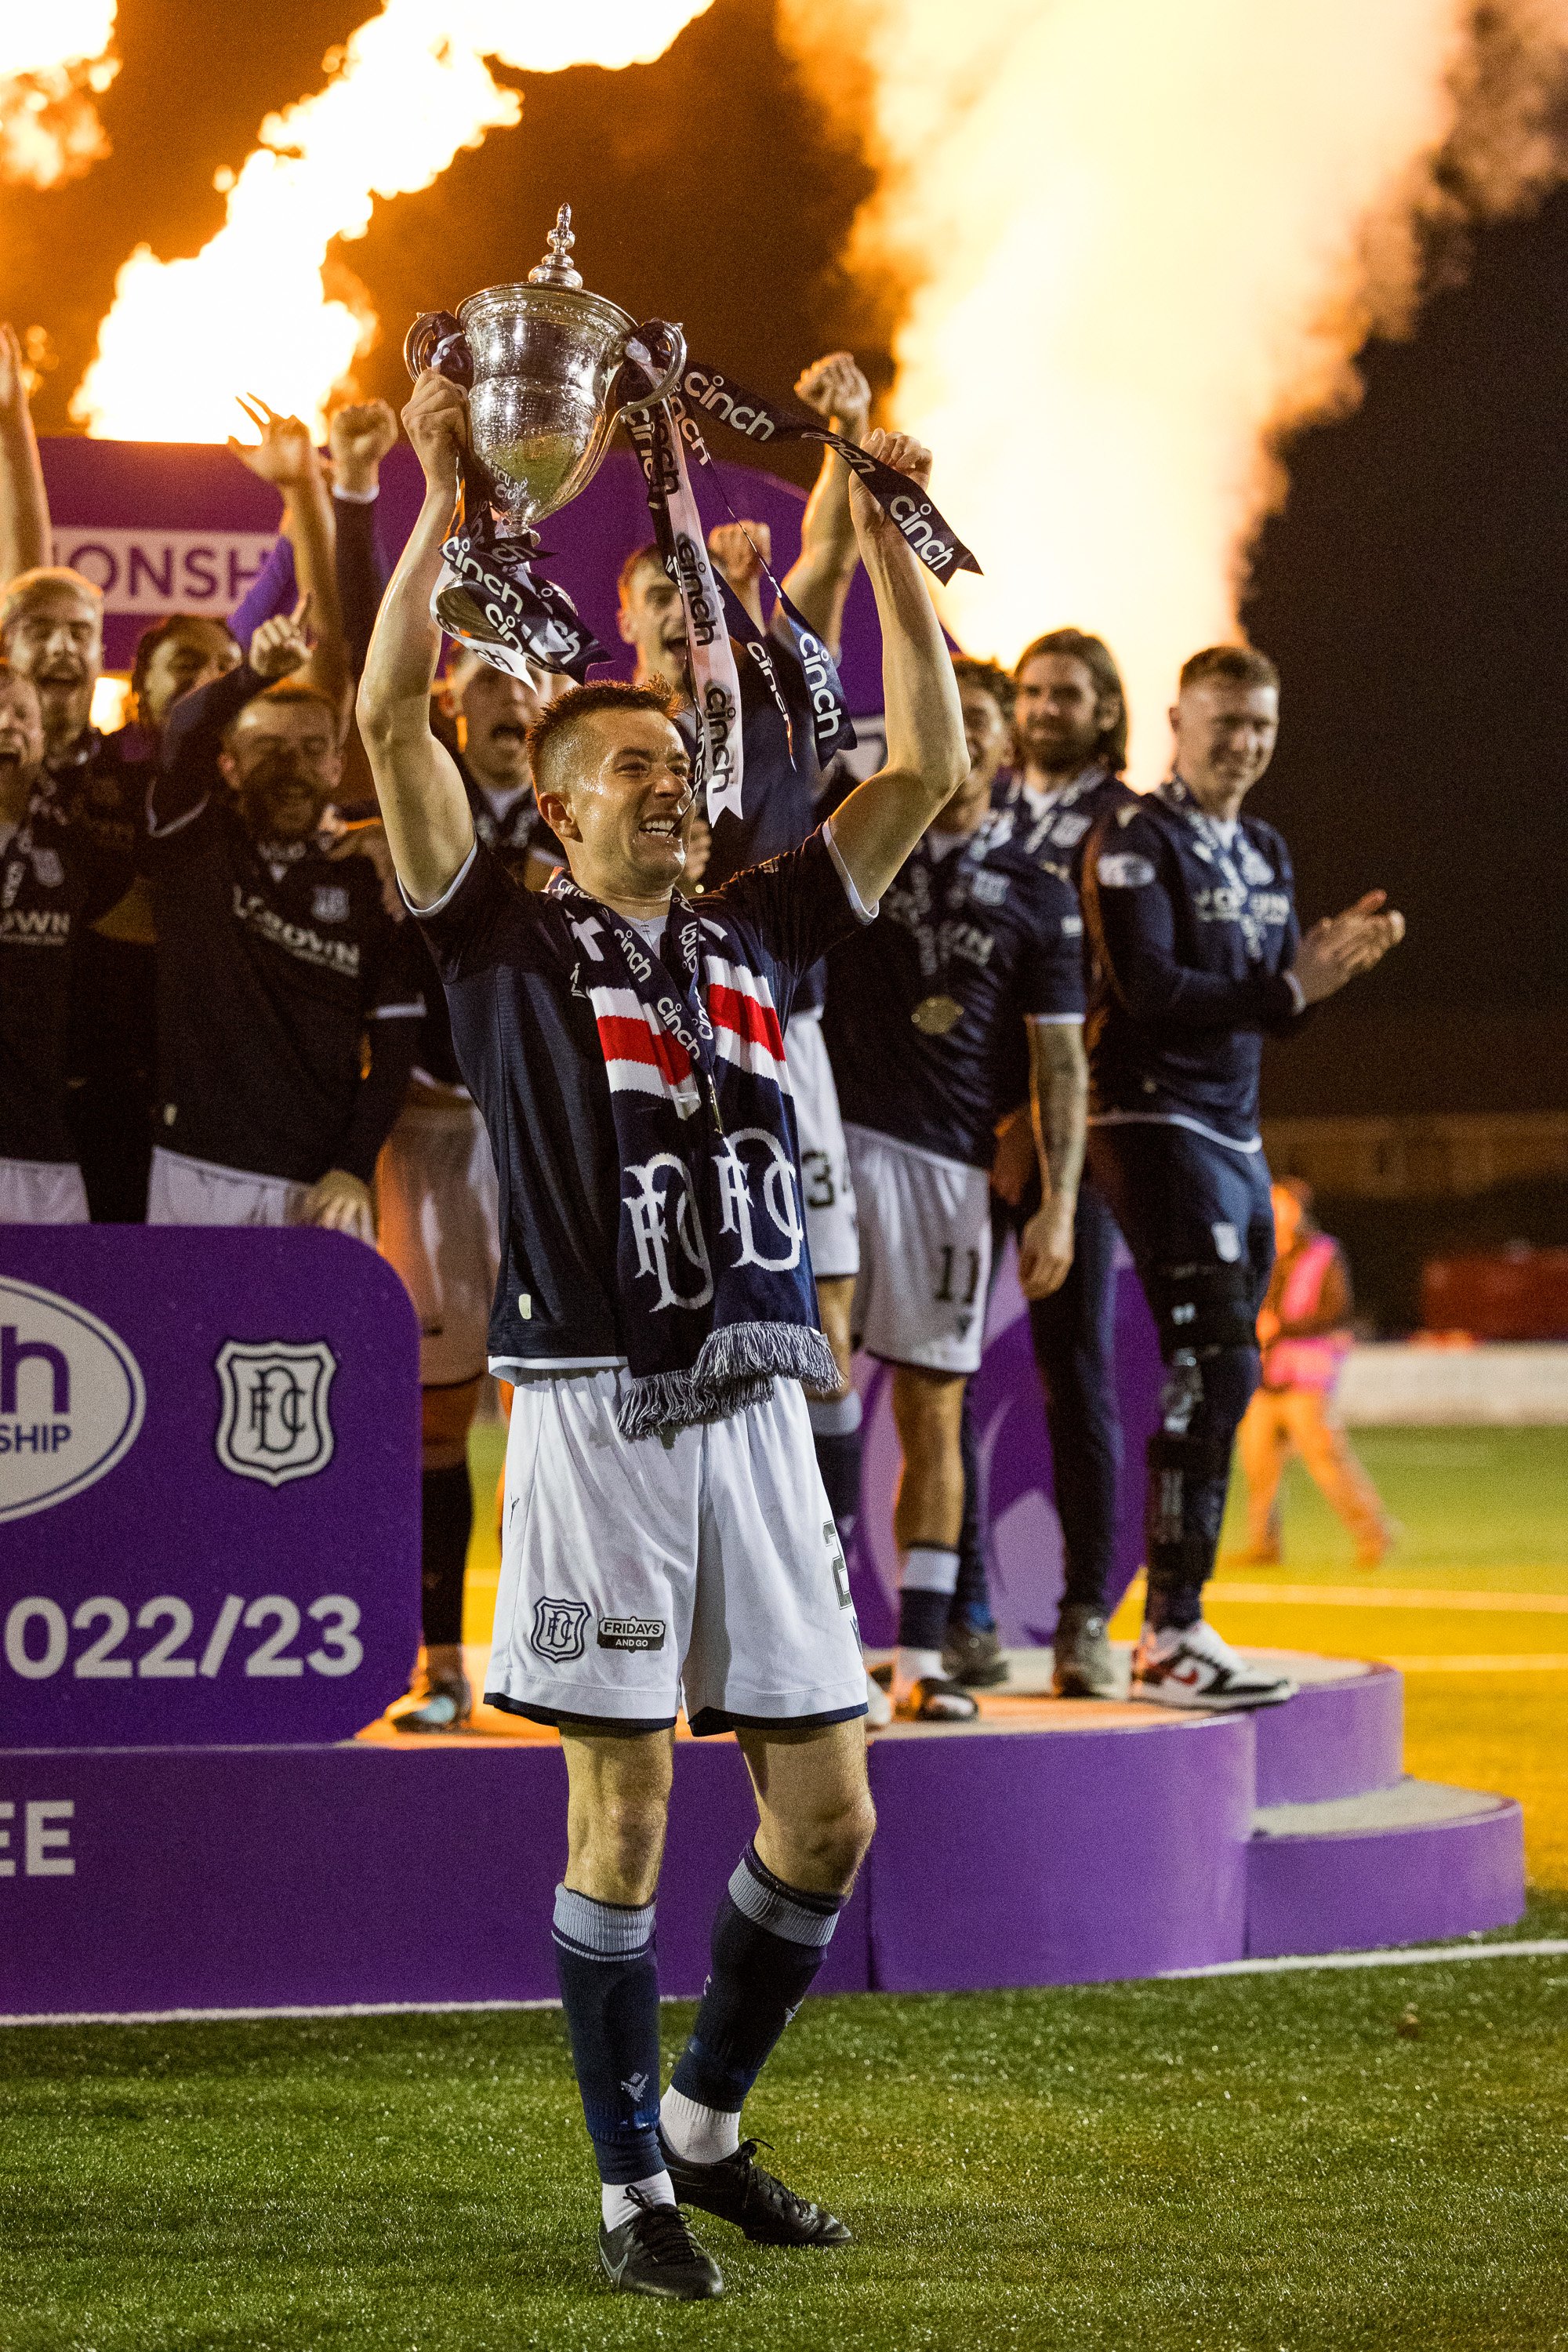  Dundee lift the championship trophy after victory over Queen’s Park in 2023 